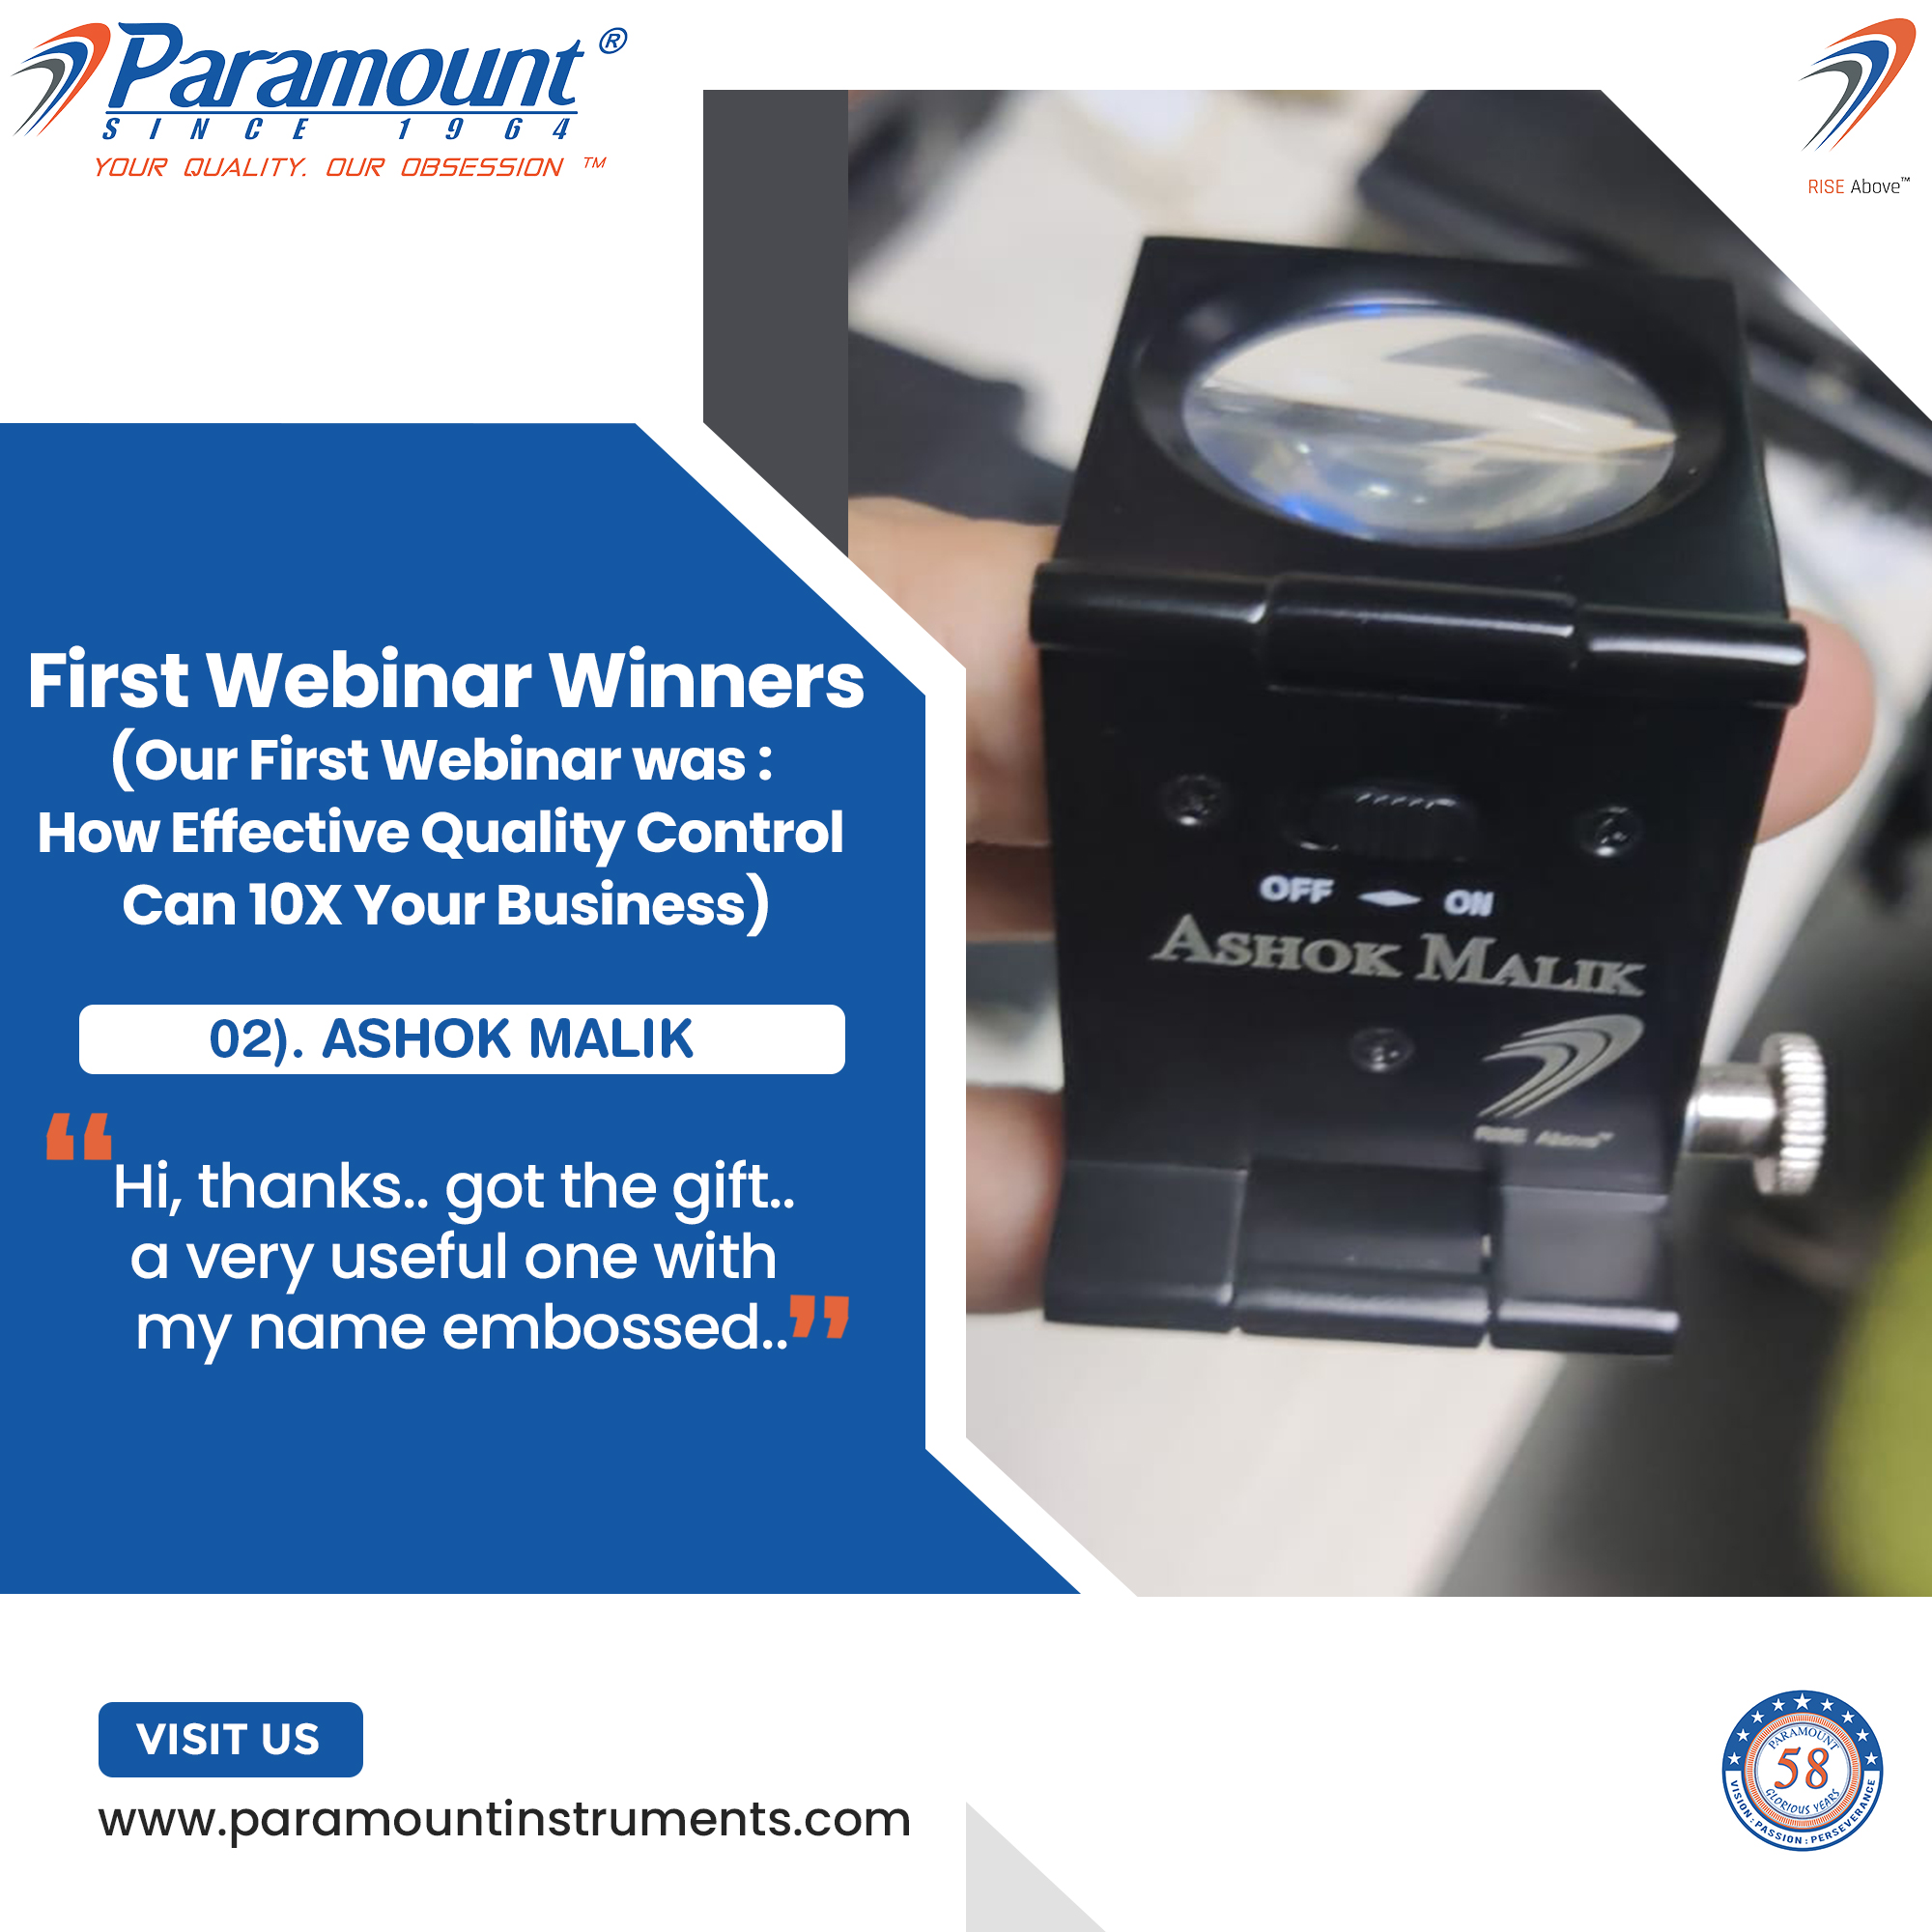 7 Paramount ©

/I NV CF 1 9 6 4

YOUR QUALITY. OUR OBSESSION ™

   
     
  
    
  
 

First Webinar Winners
(Our First Webinar was :
How Effective Quality Control
Can 10X Your Business)

02). ASHOK MALIK

Hi, thanks.. got the gift.
a very useful one with
my name embossed..

VISIT US

www.paramountinstruments.com